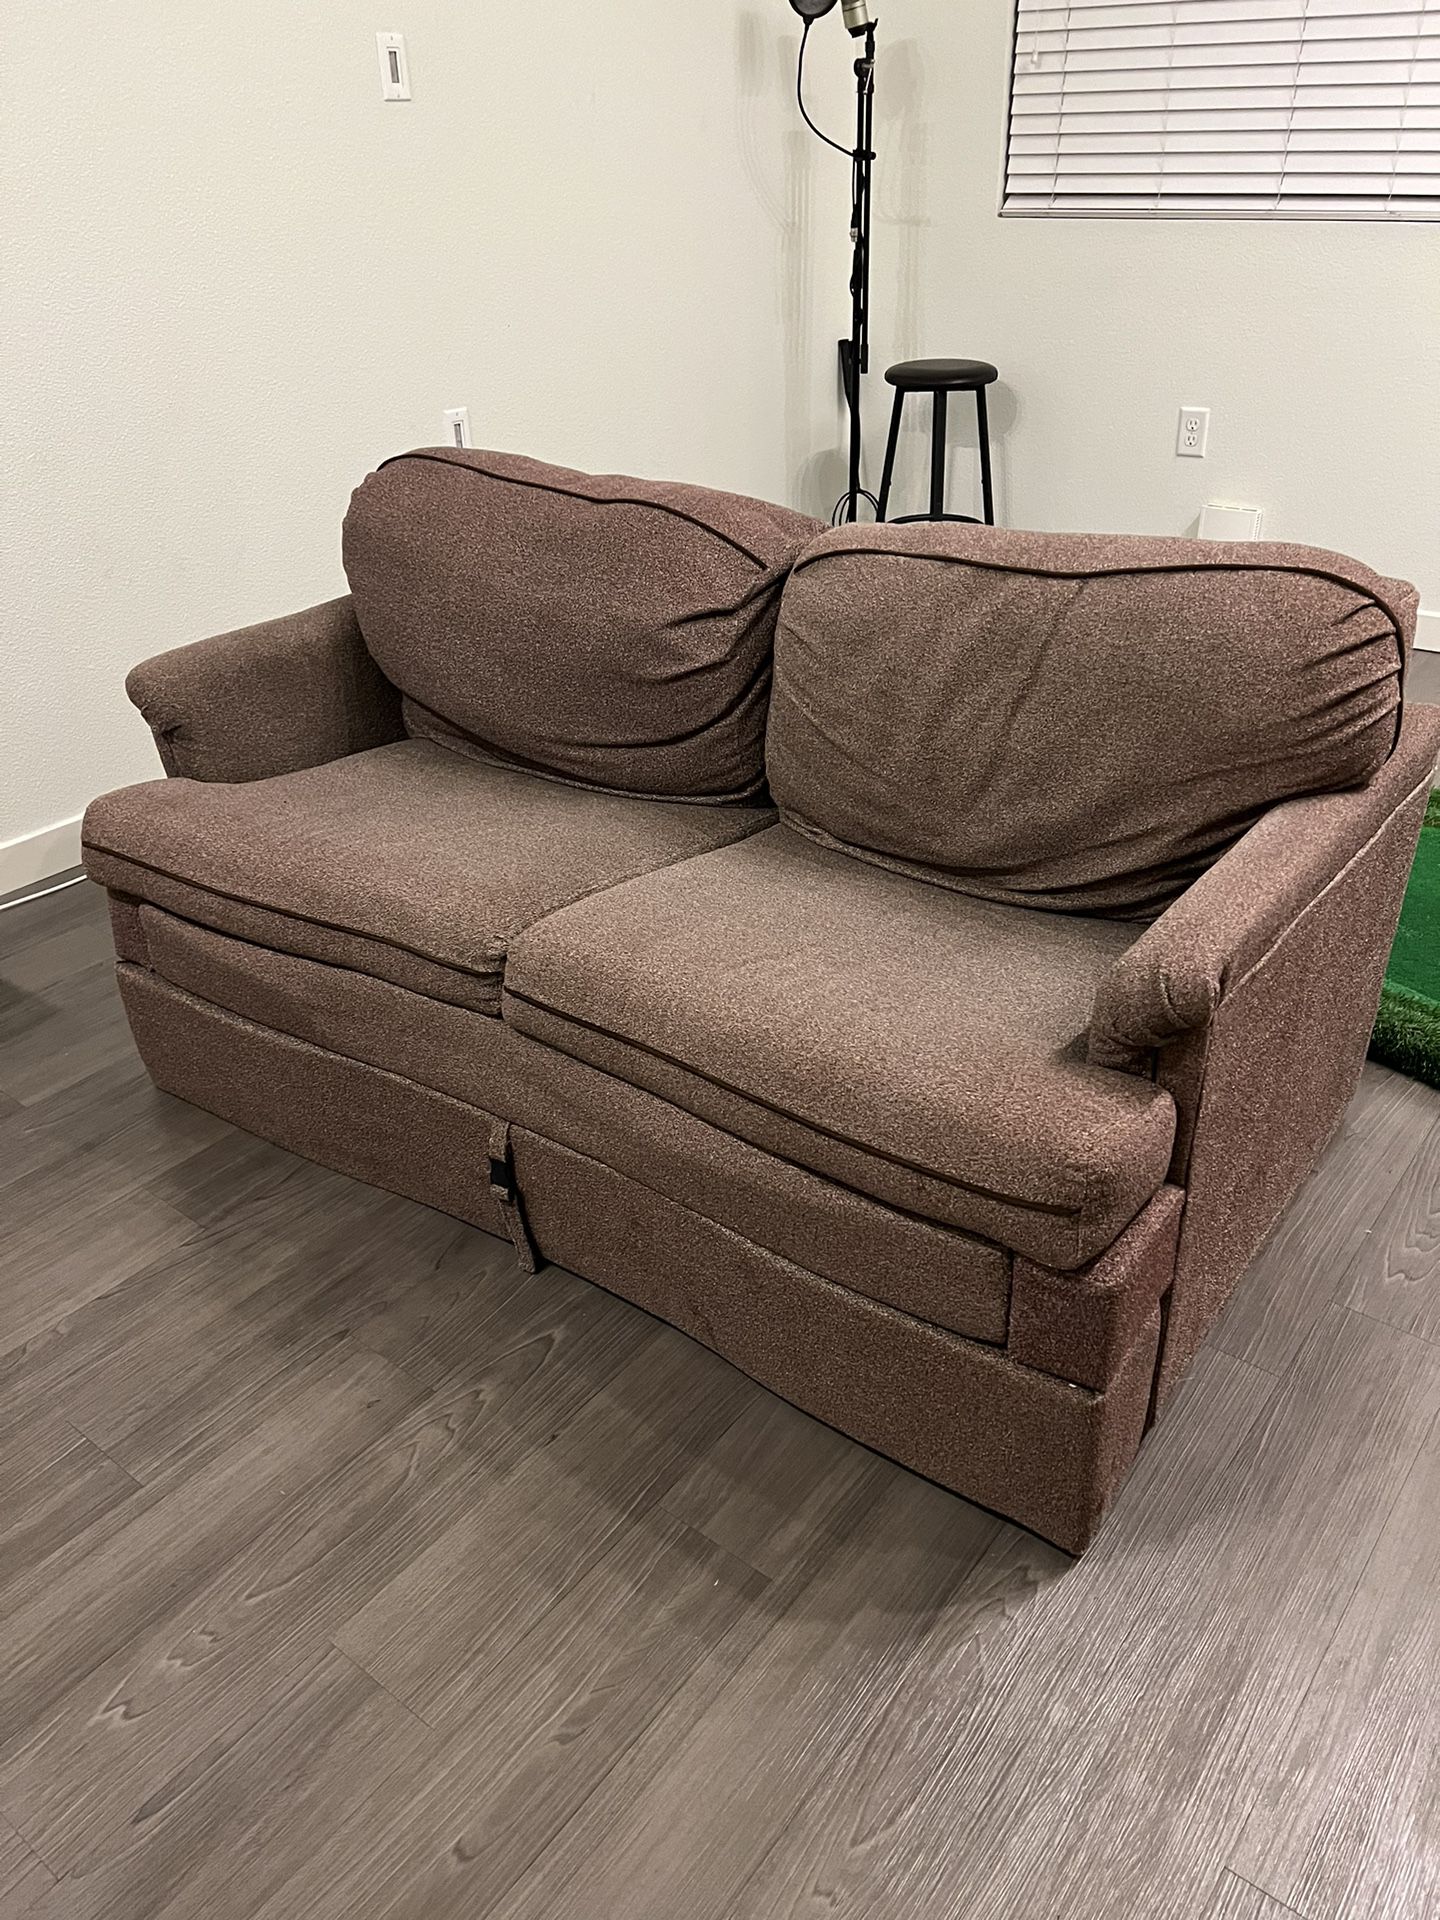 Free Couch, Free Bed Frame, Free Desk